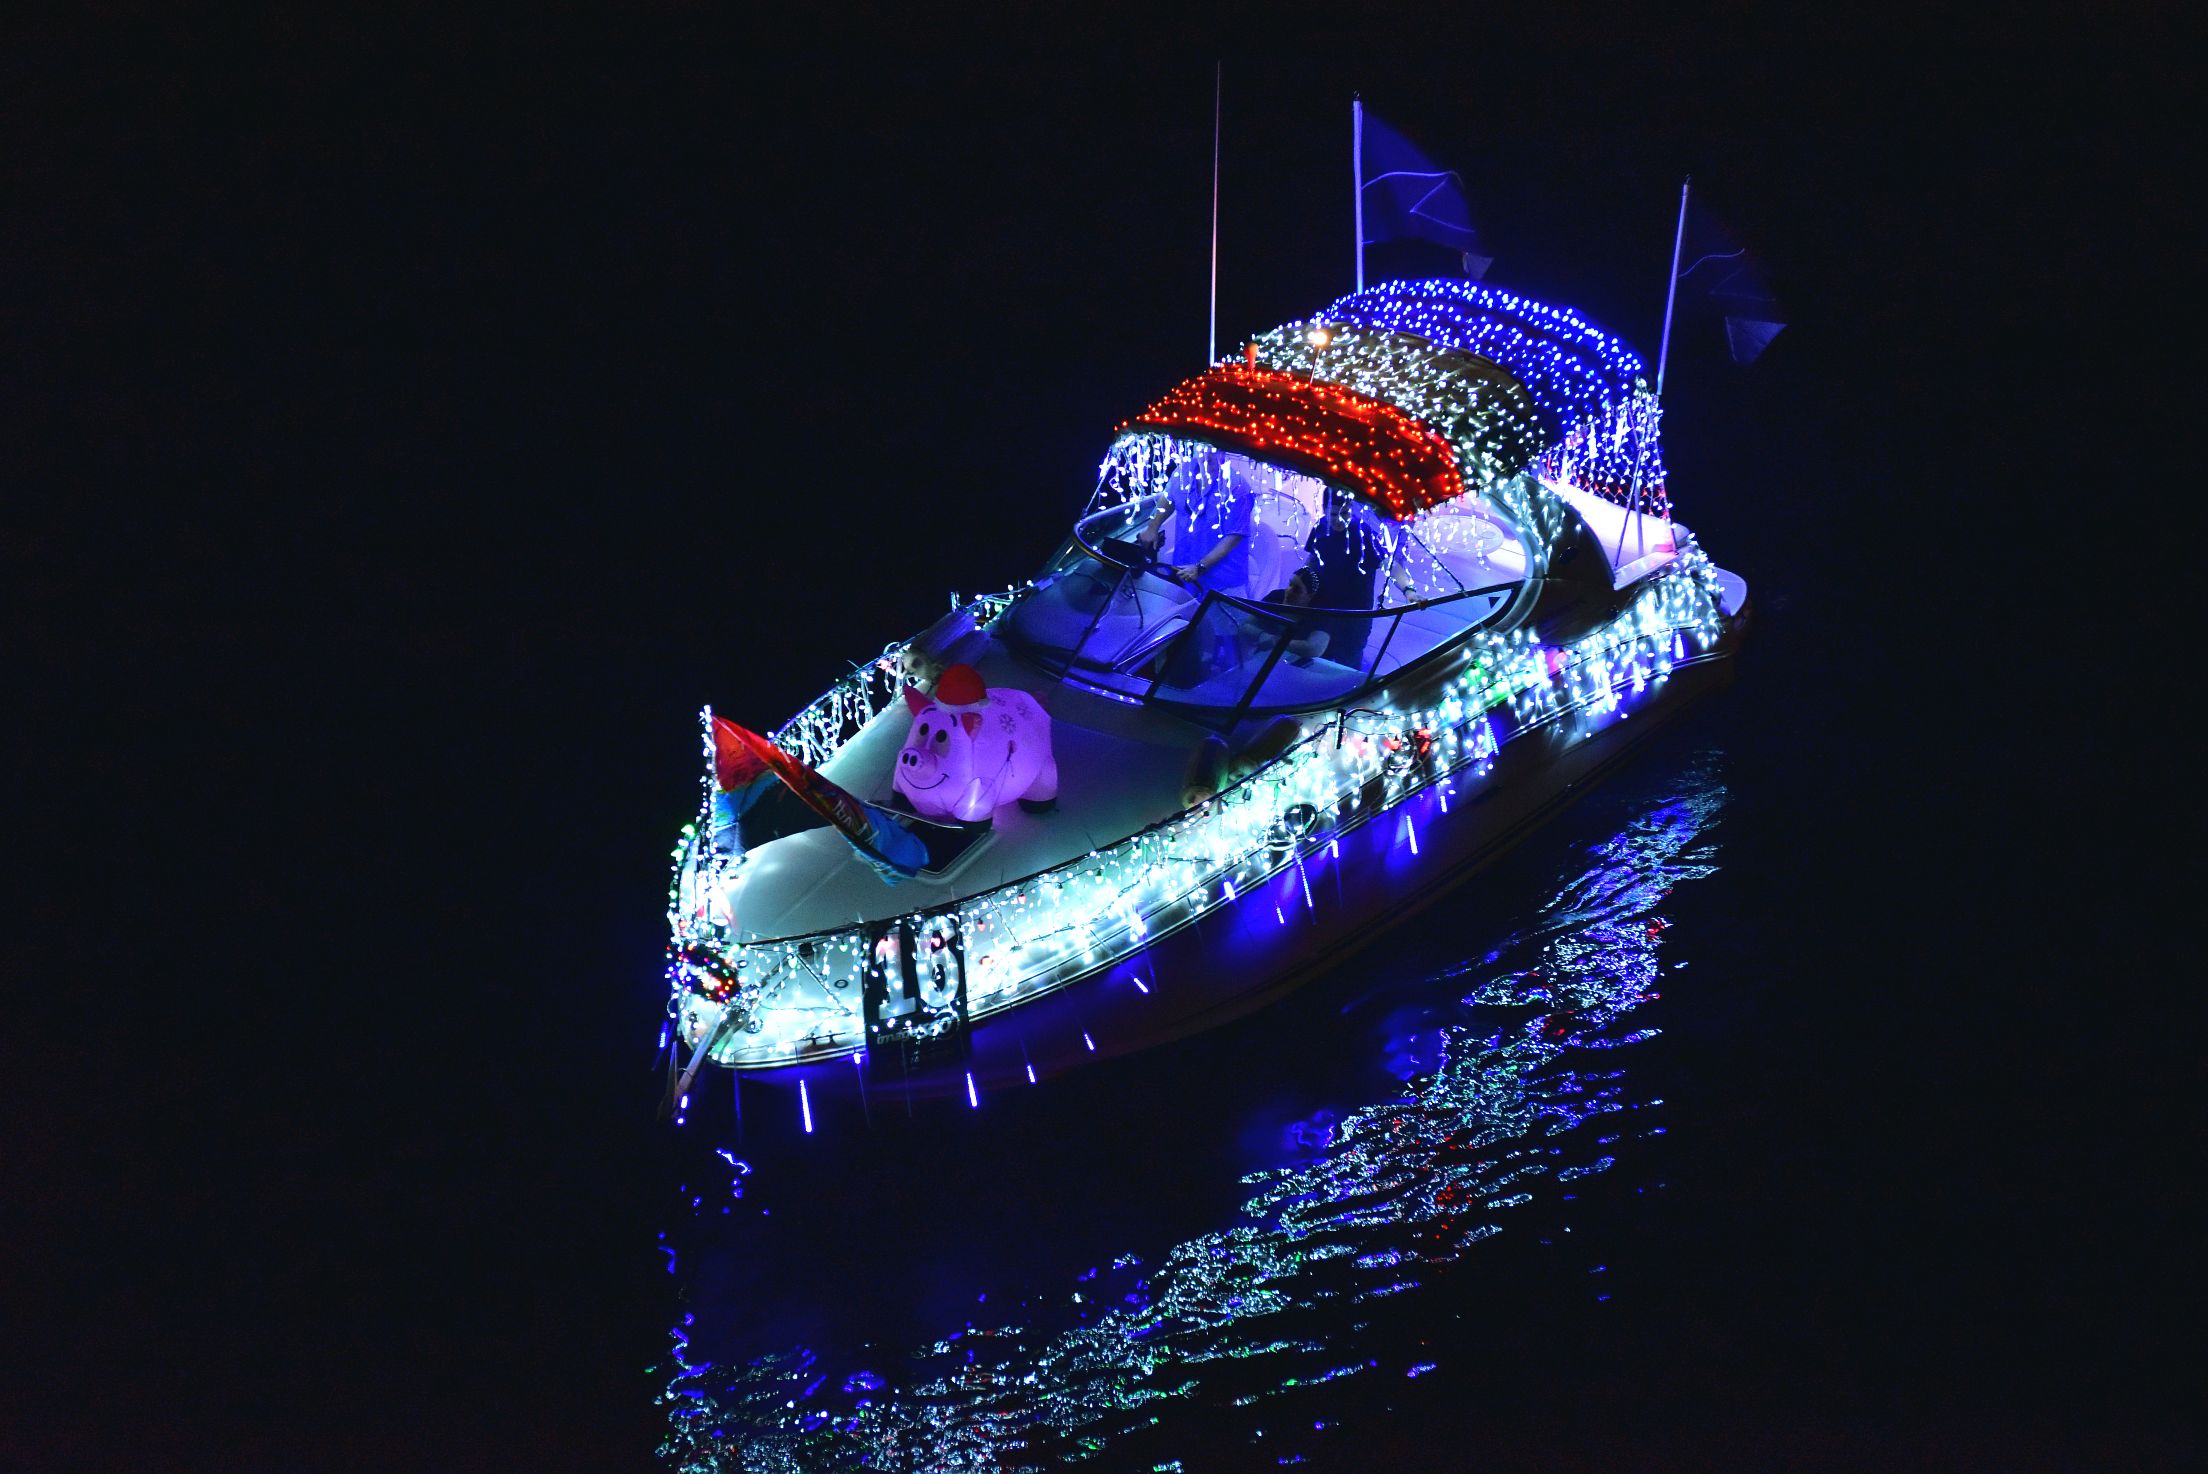 Felicity, boat number 16 in the 2021 Winterfest Boat Parade